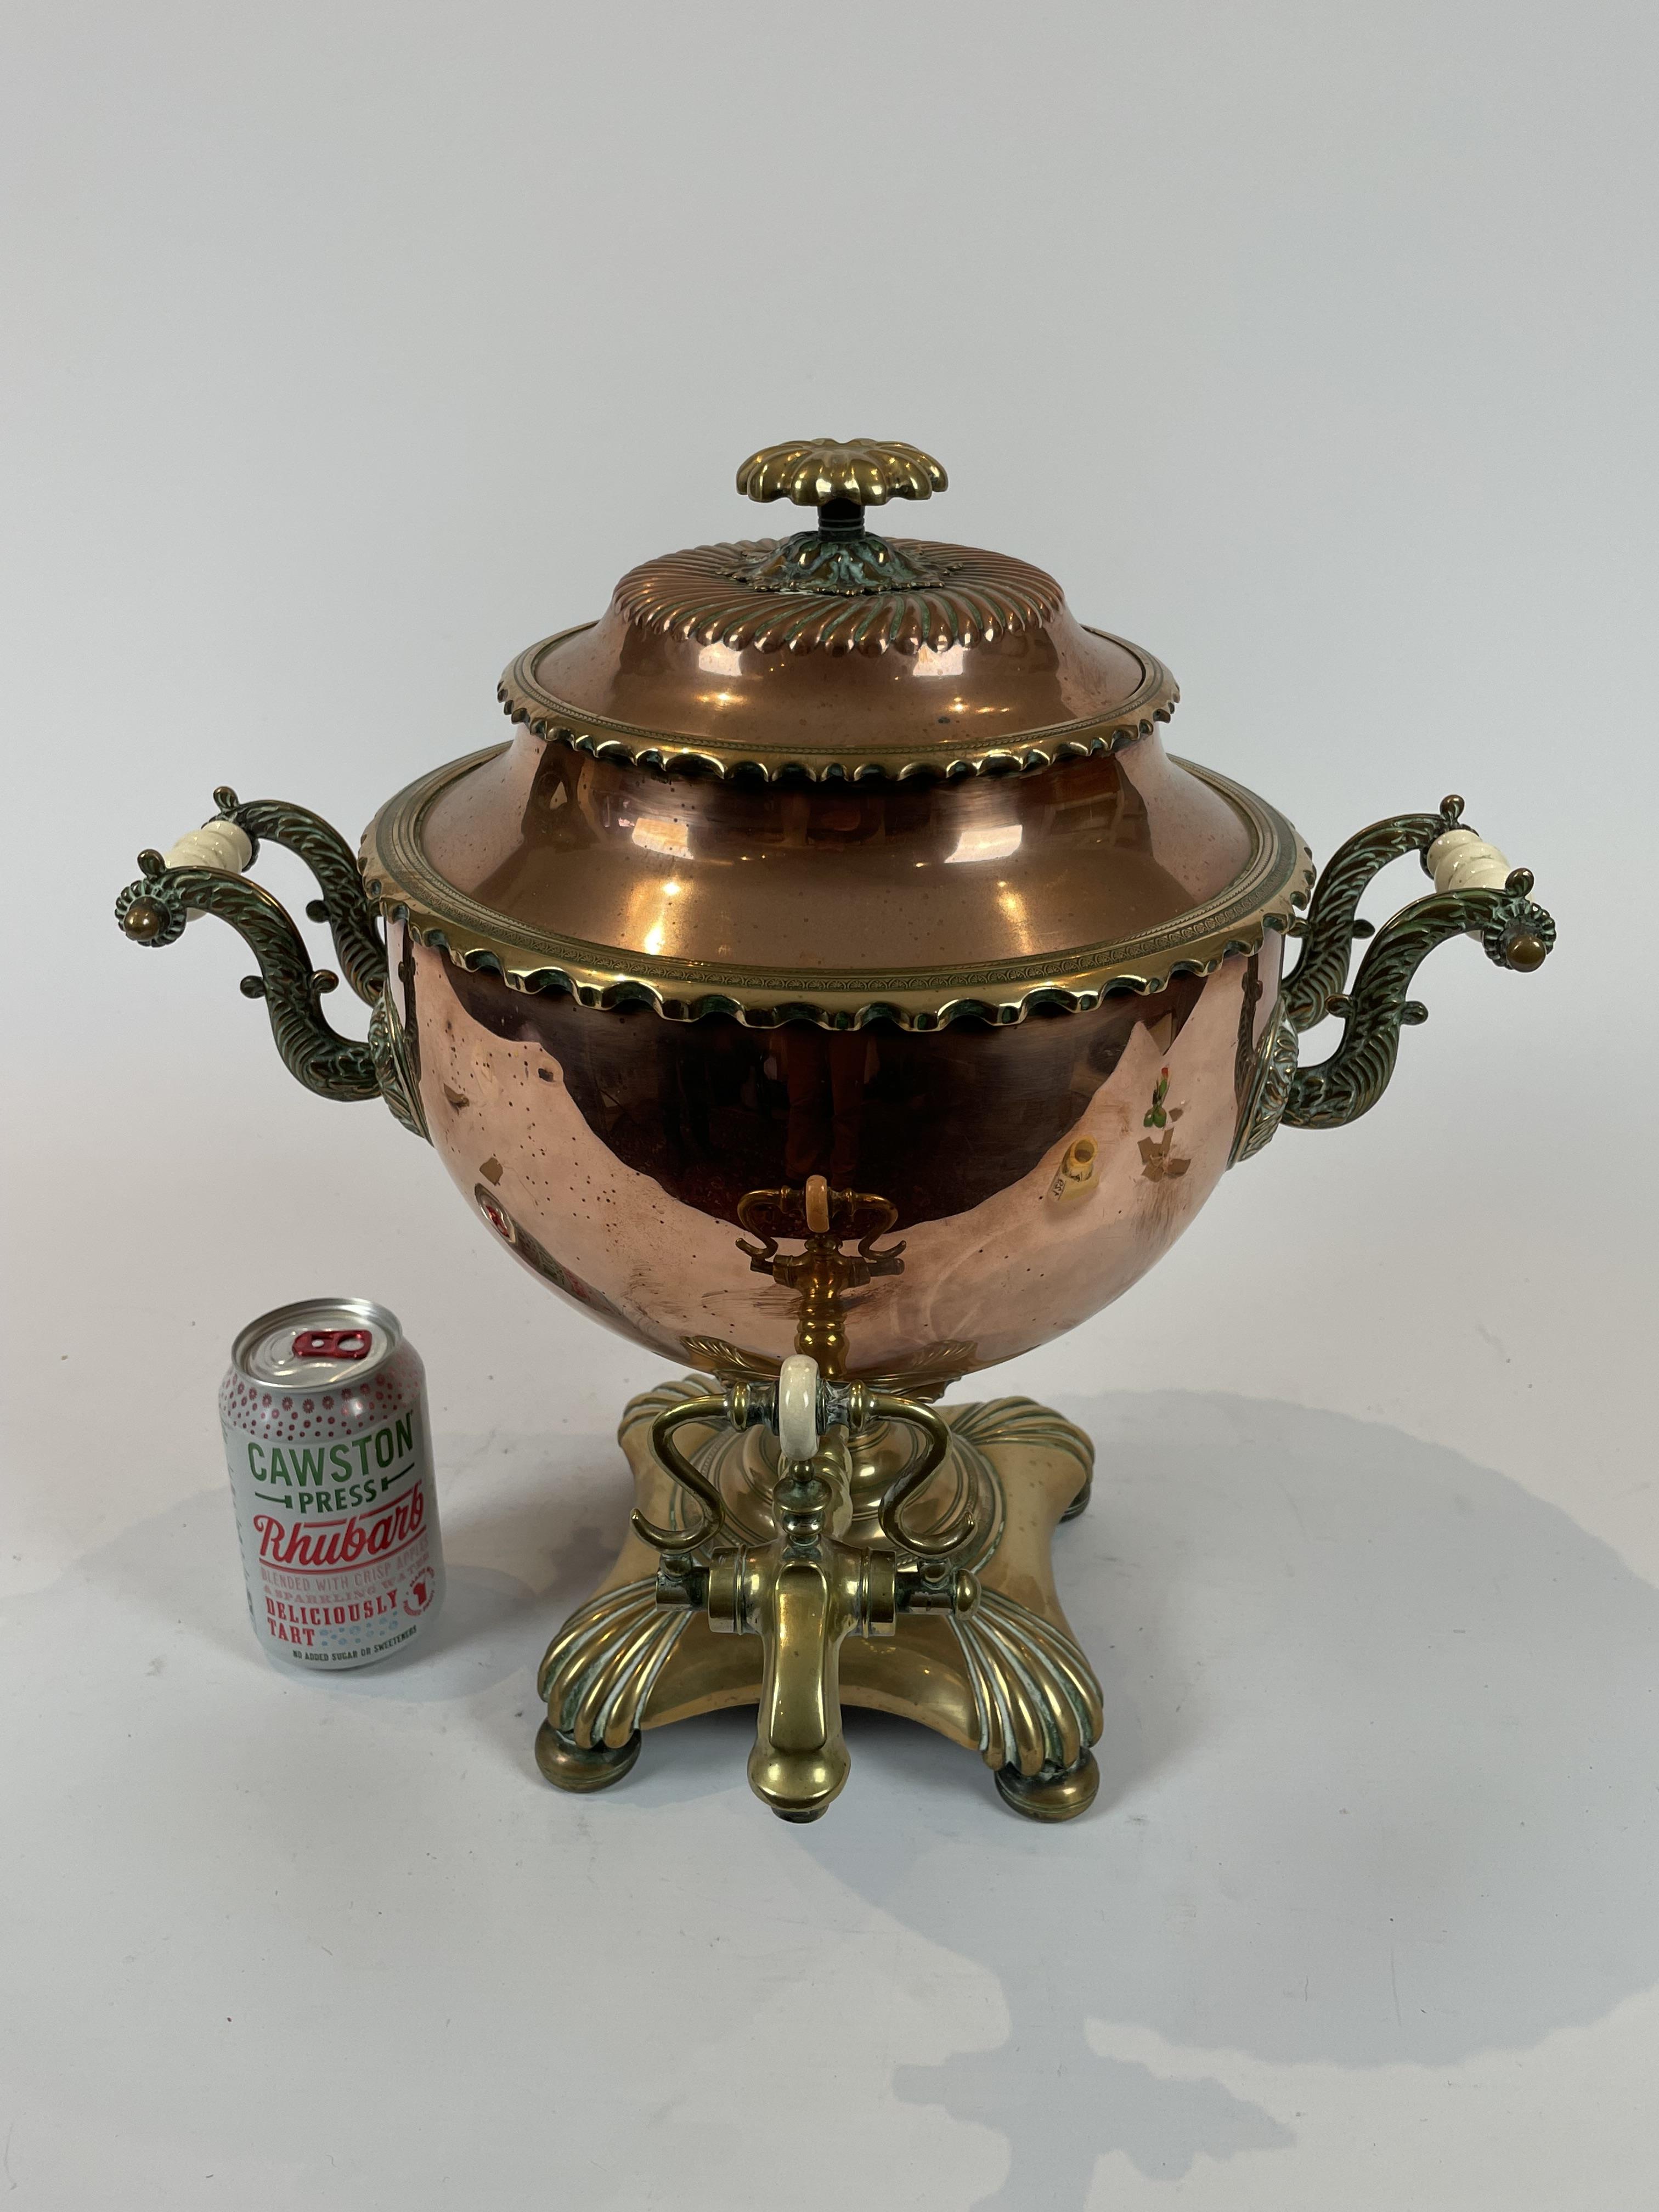 A Large Copper And Brass Samovar With Porcelain Handles